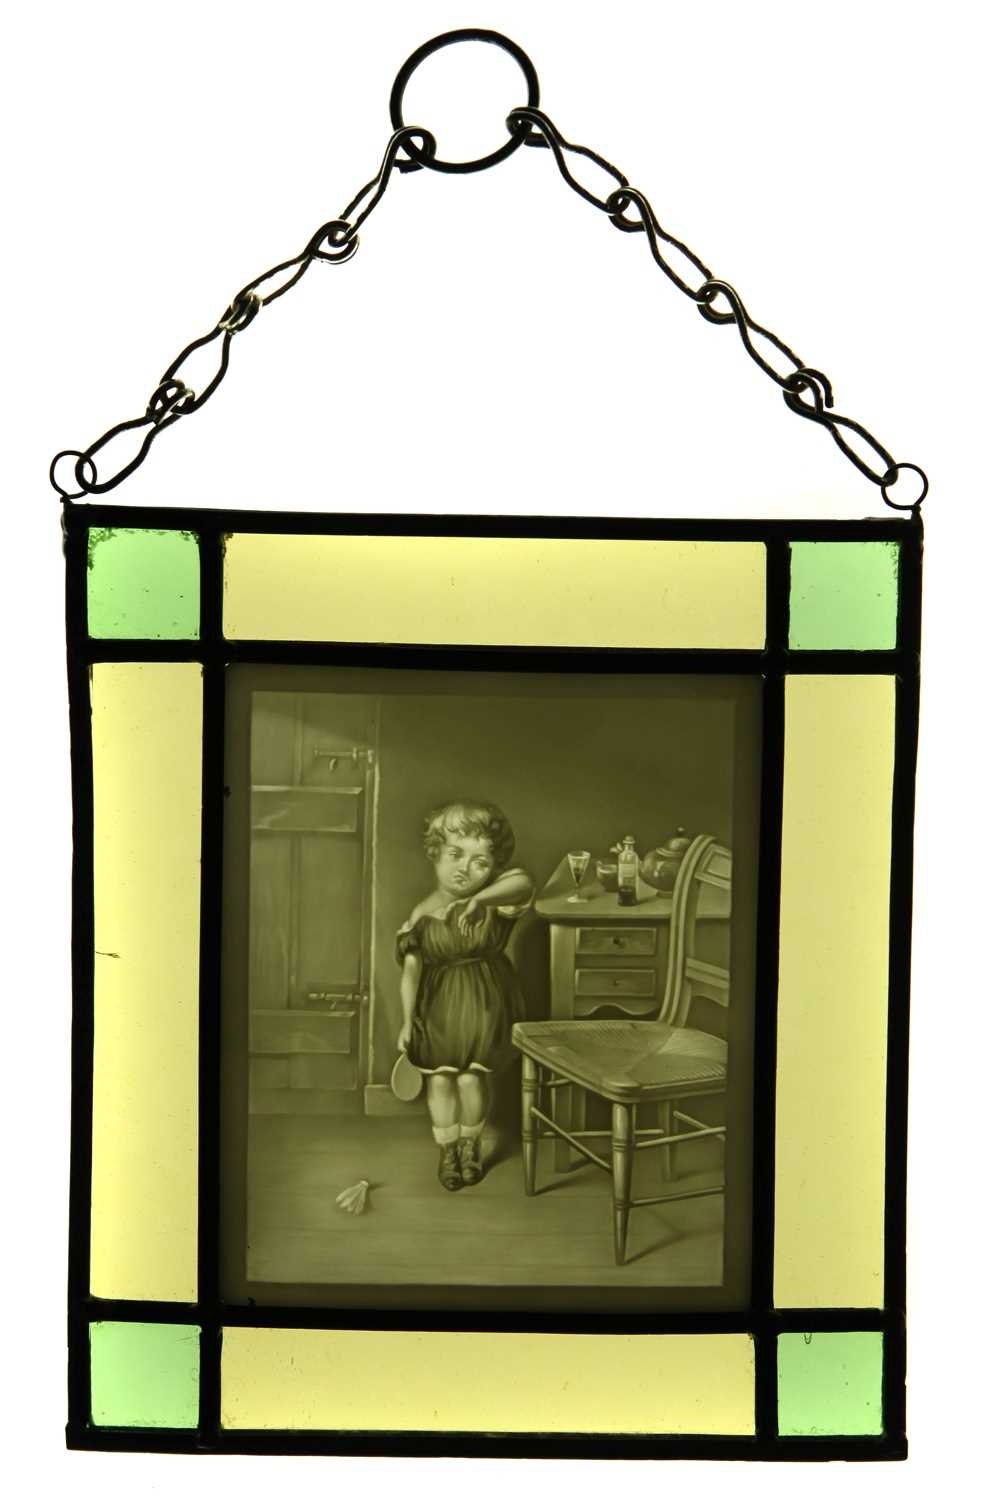 Lot 116 - A Lithophane in Stained Glass Frame